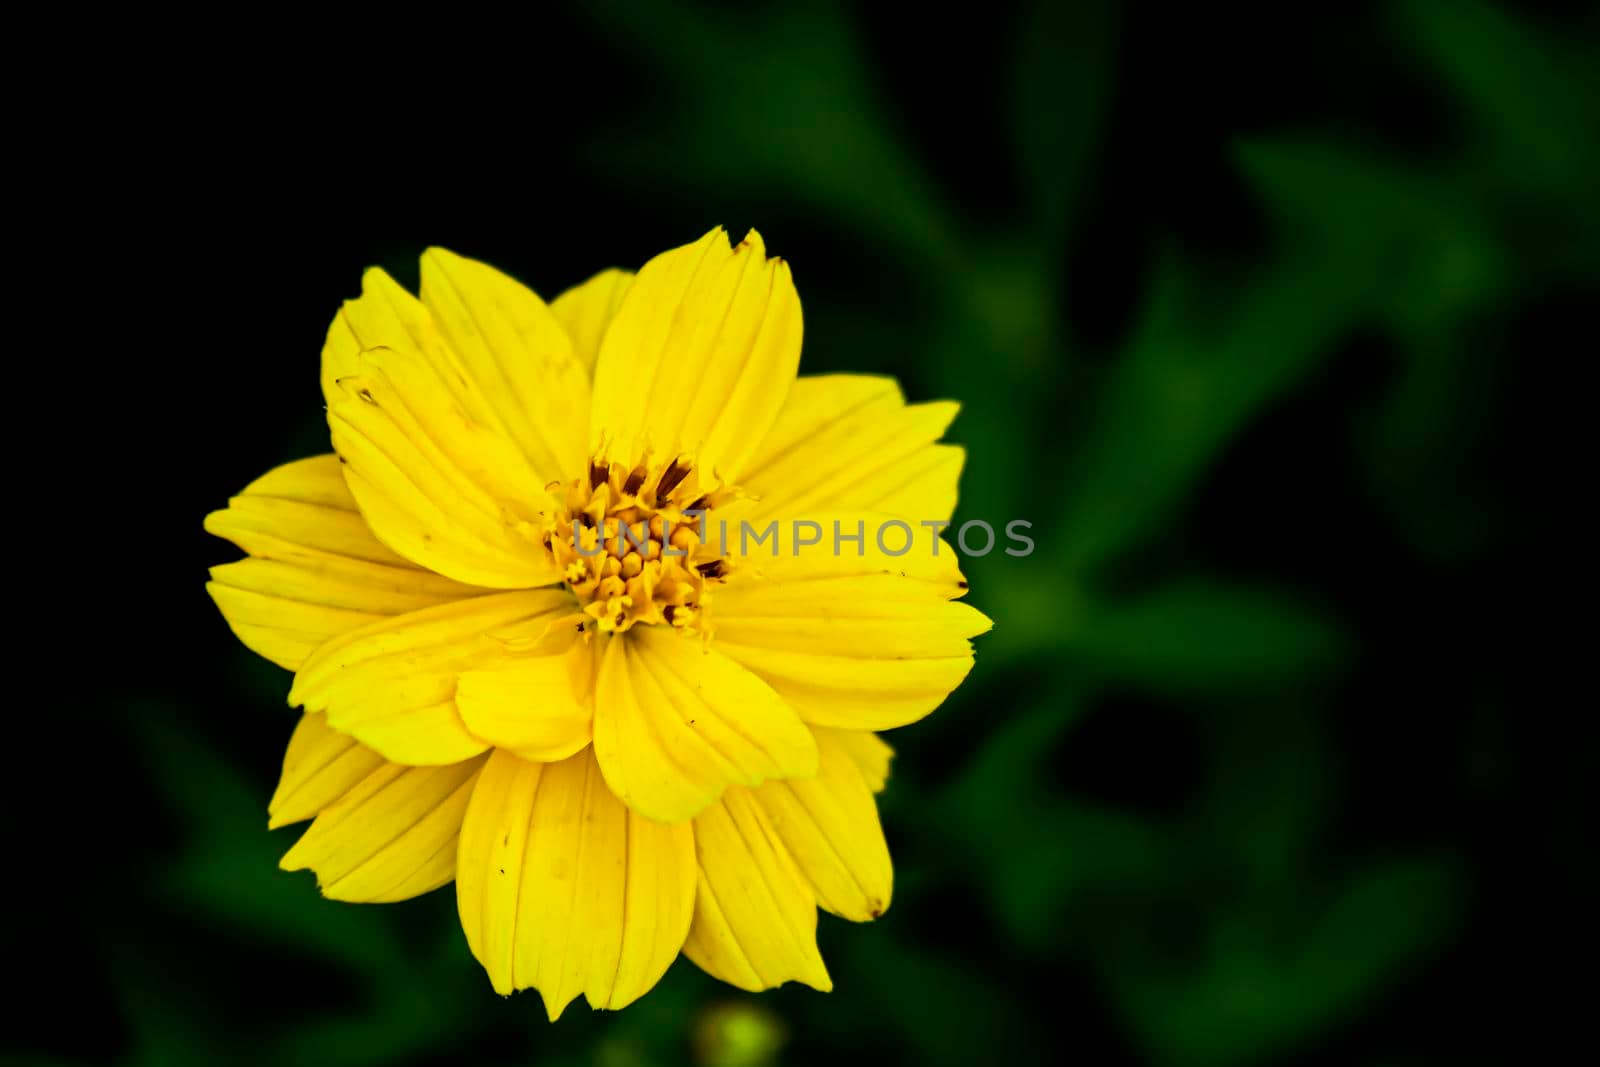 Flower of yellow color on green leaves dark background. Summer time idea.